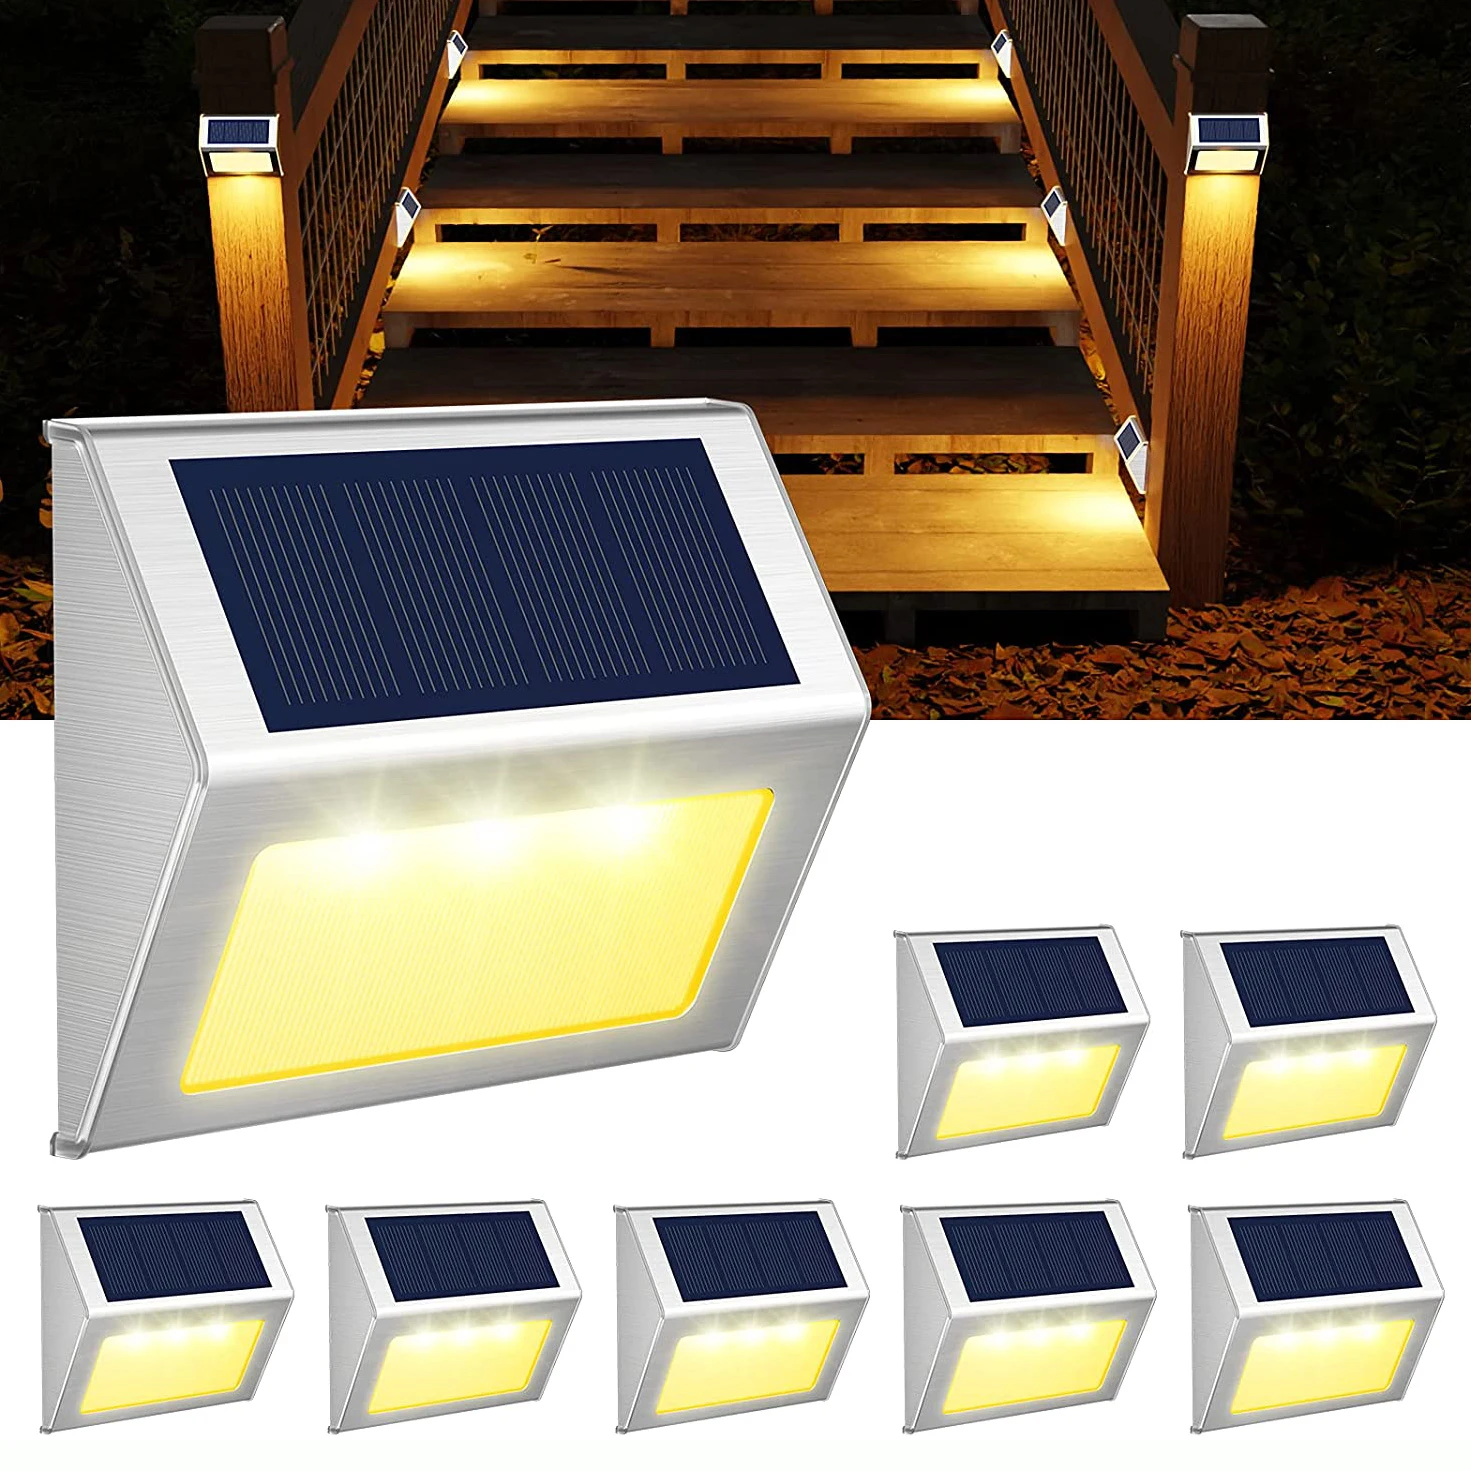 2PCS 3 LED Solar Power Stair Light Outdoor Garden Pathway Step Decking Wall Lamp 